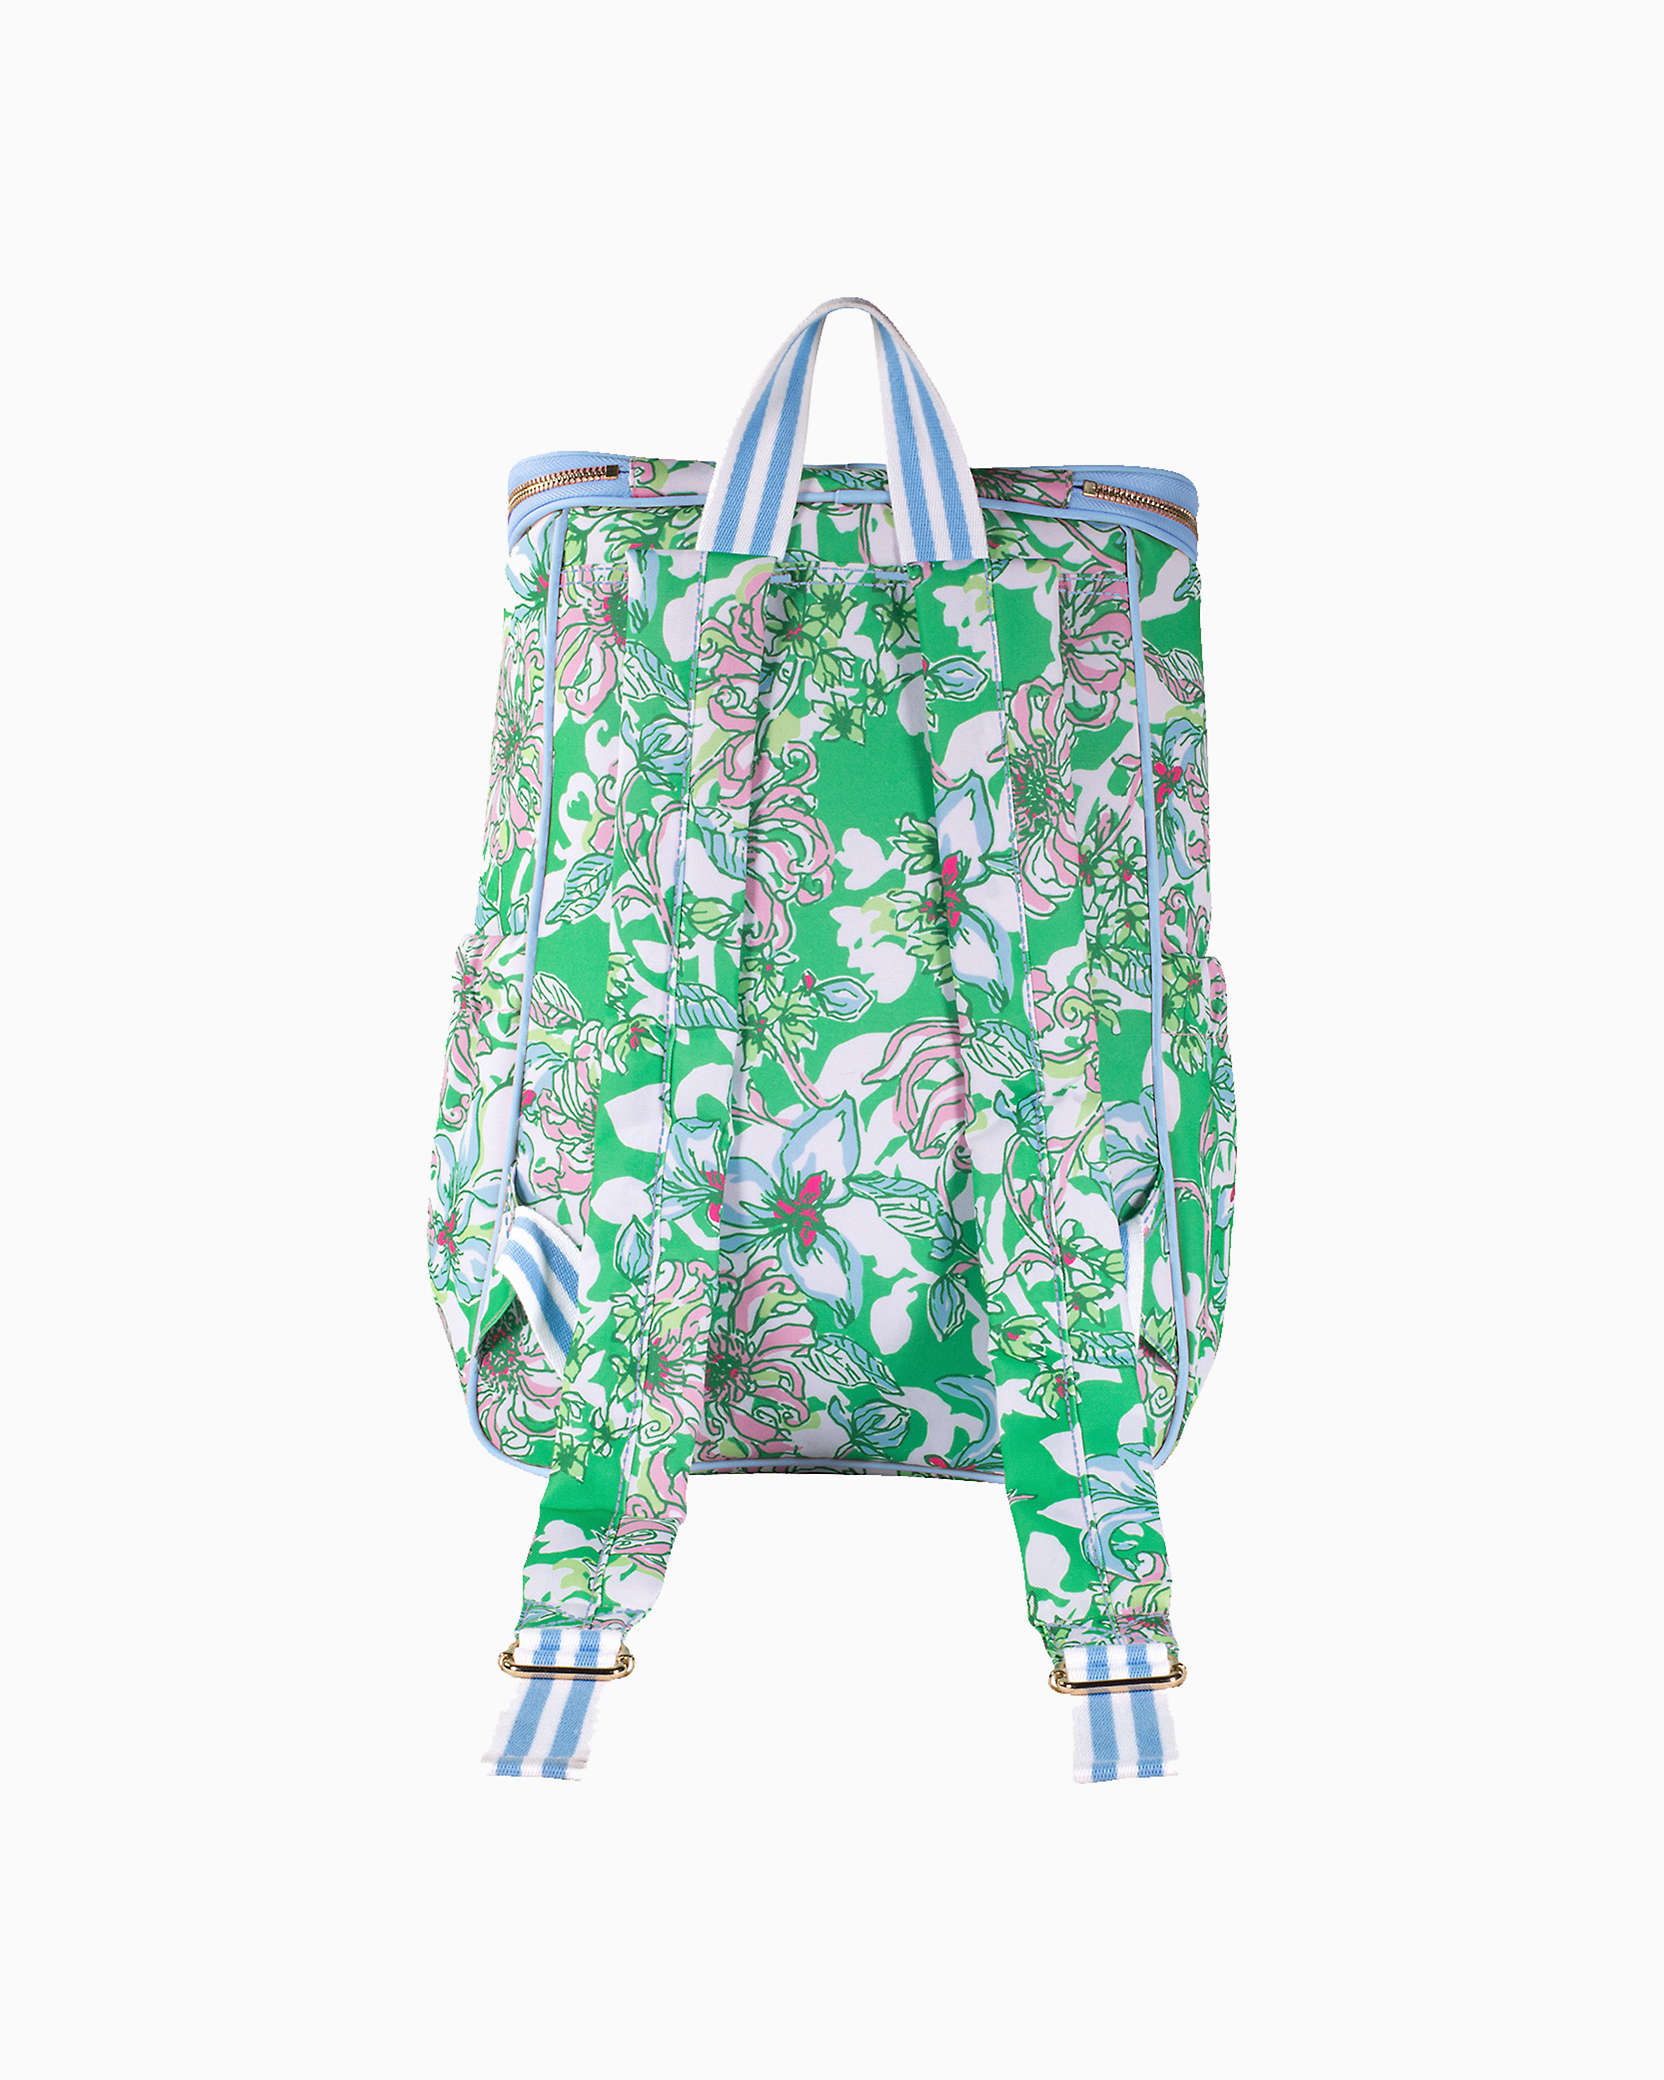 Shop Lilly Pulitzer Backpack Cooler In Spearmint Blossom Views